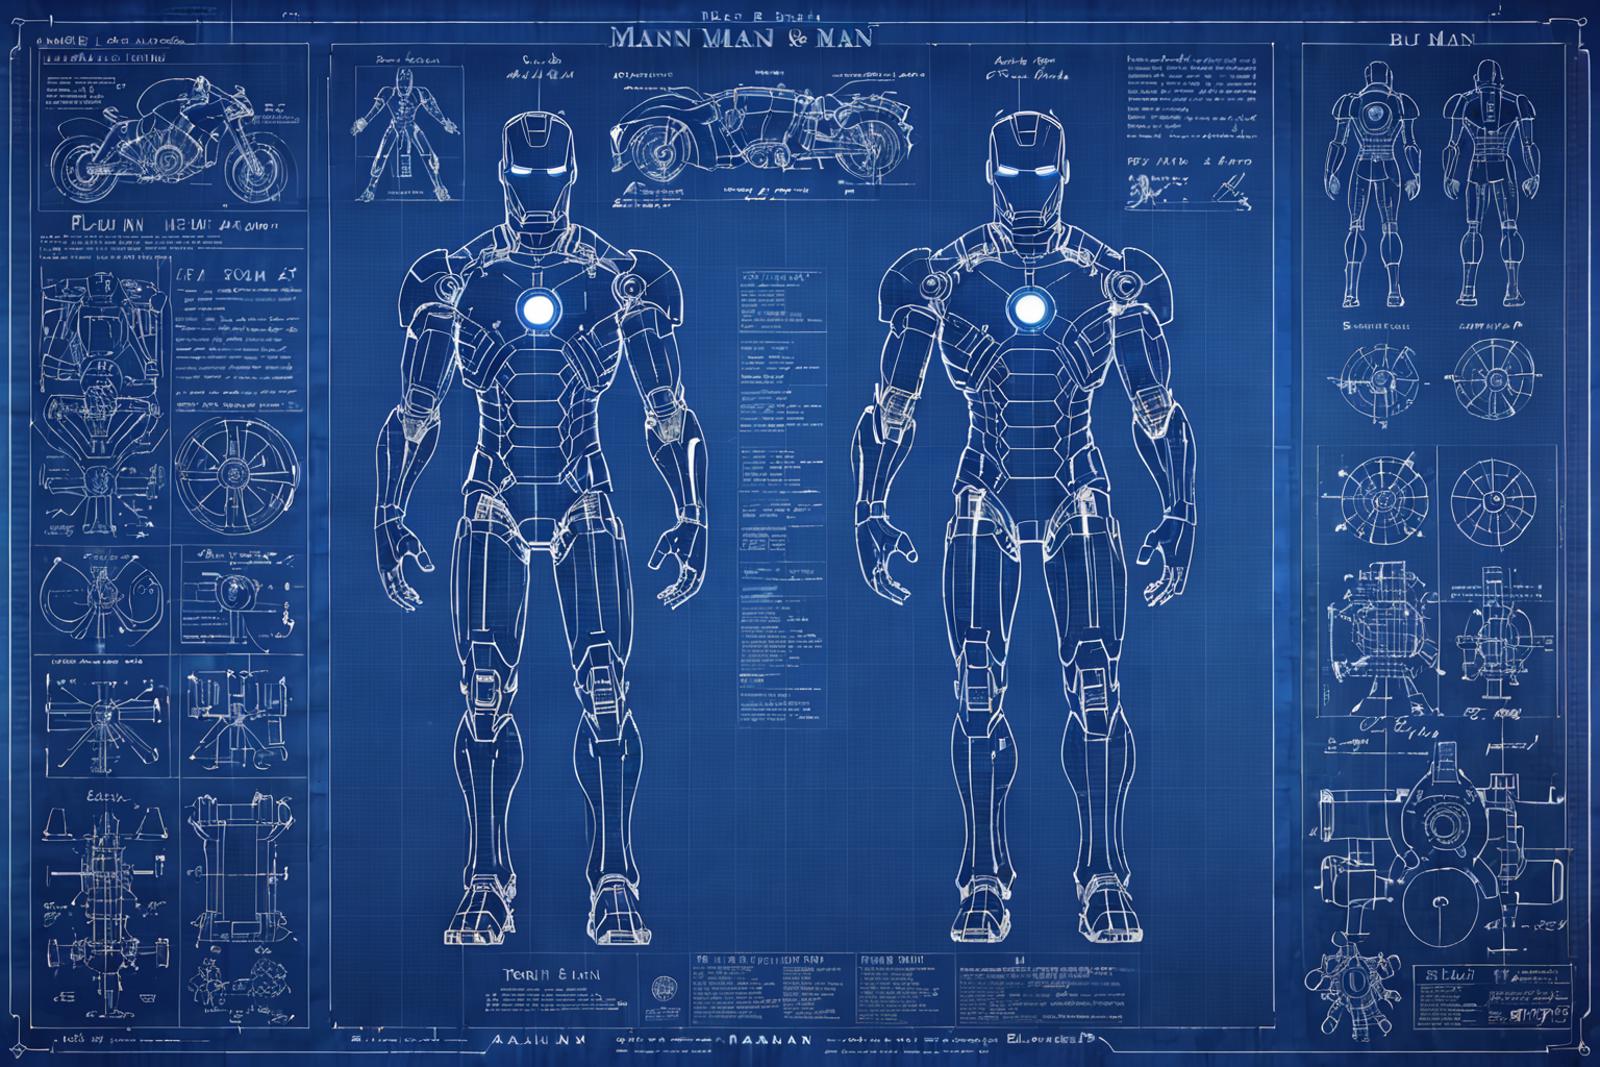 Blueprints of Iron Man's Suit - Detailed Design of the Armor